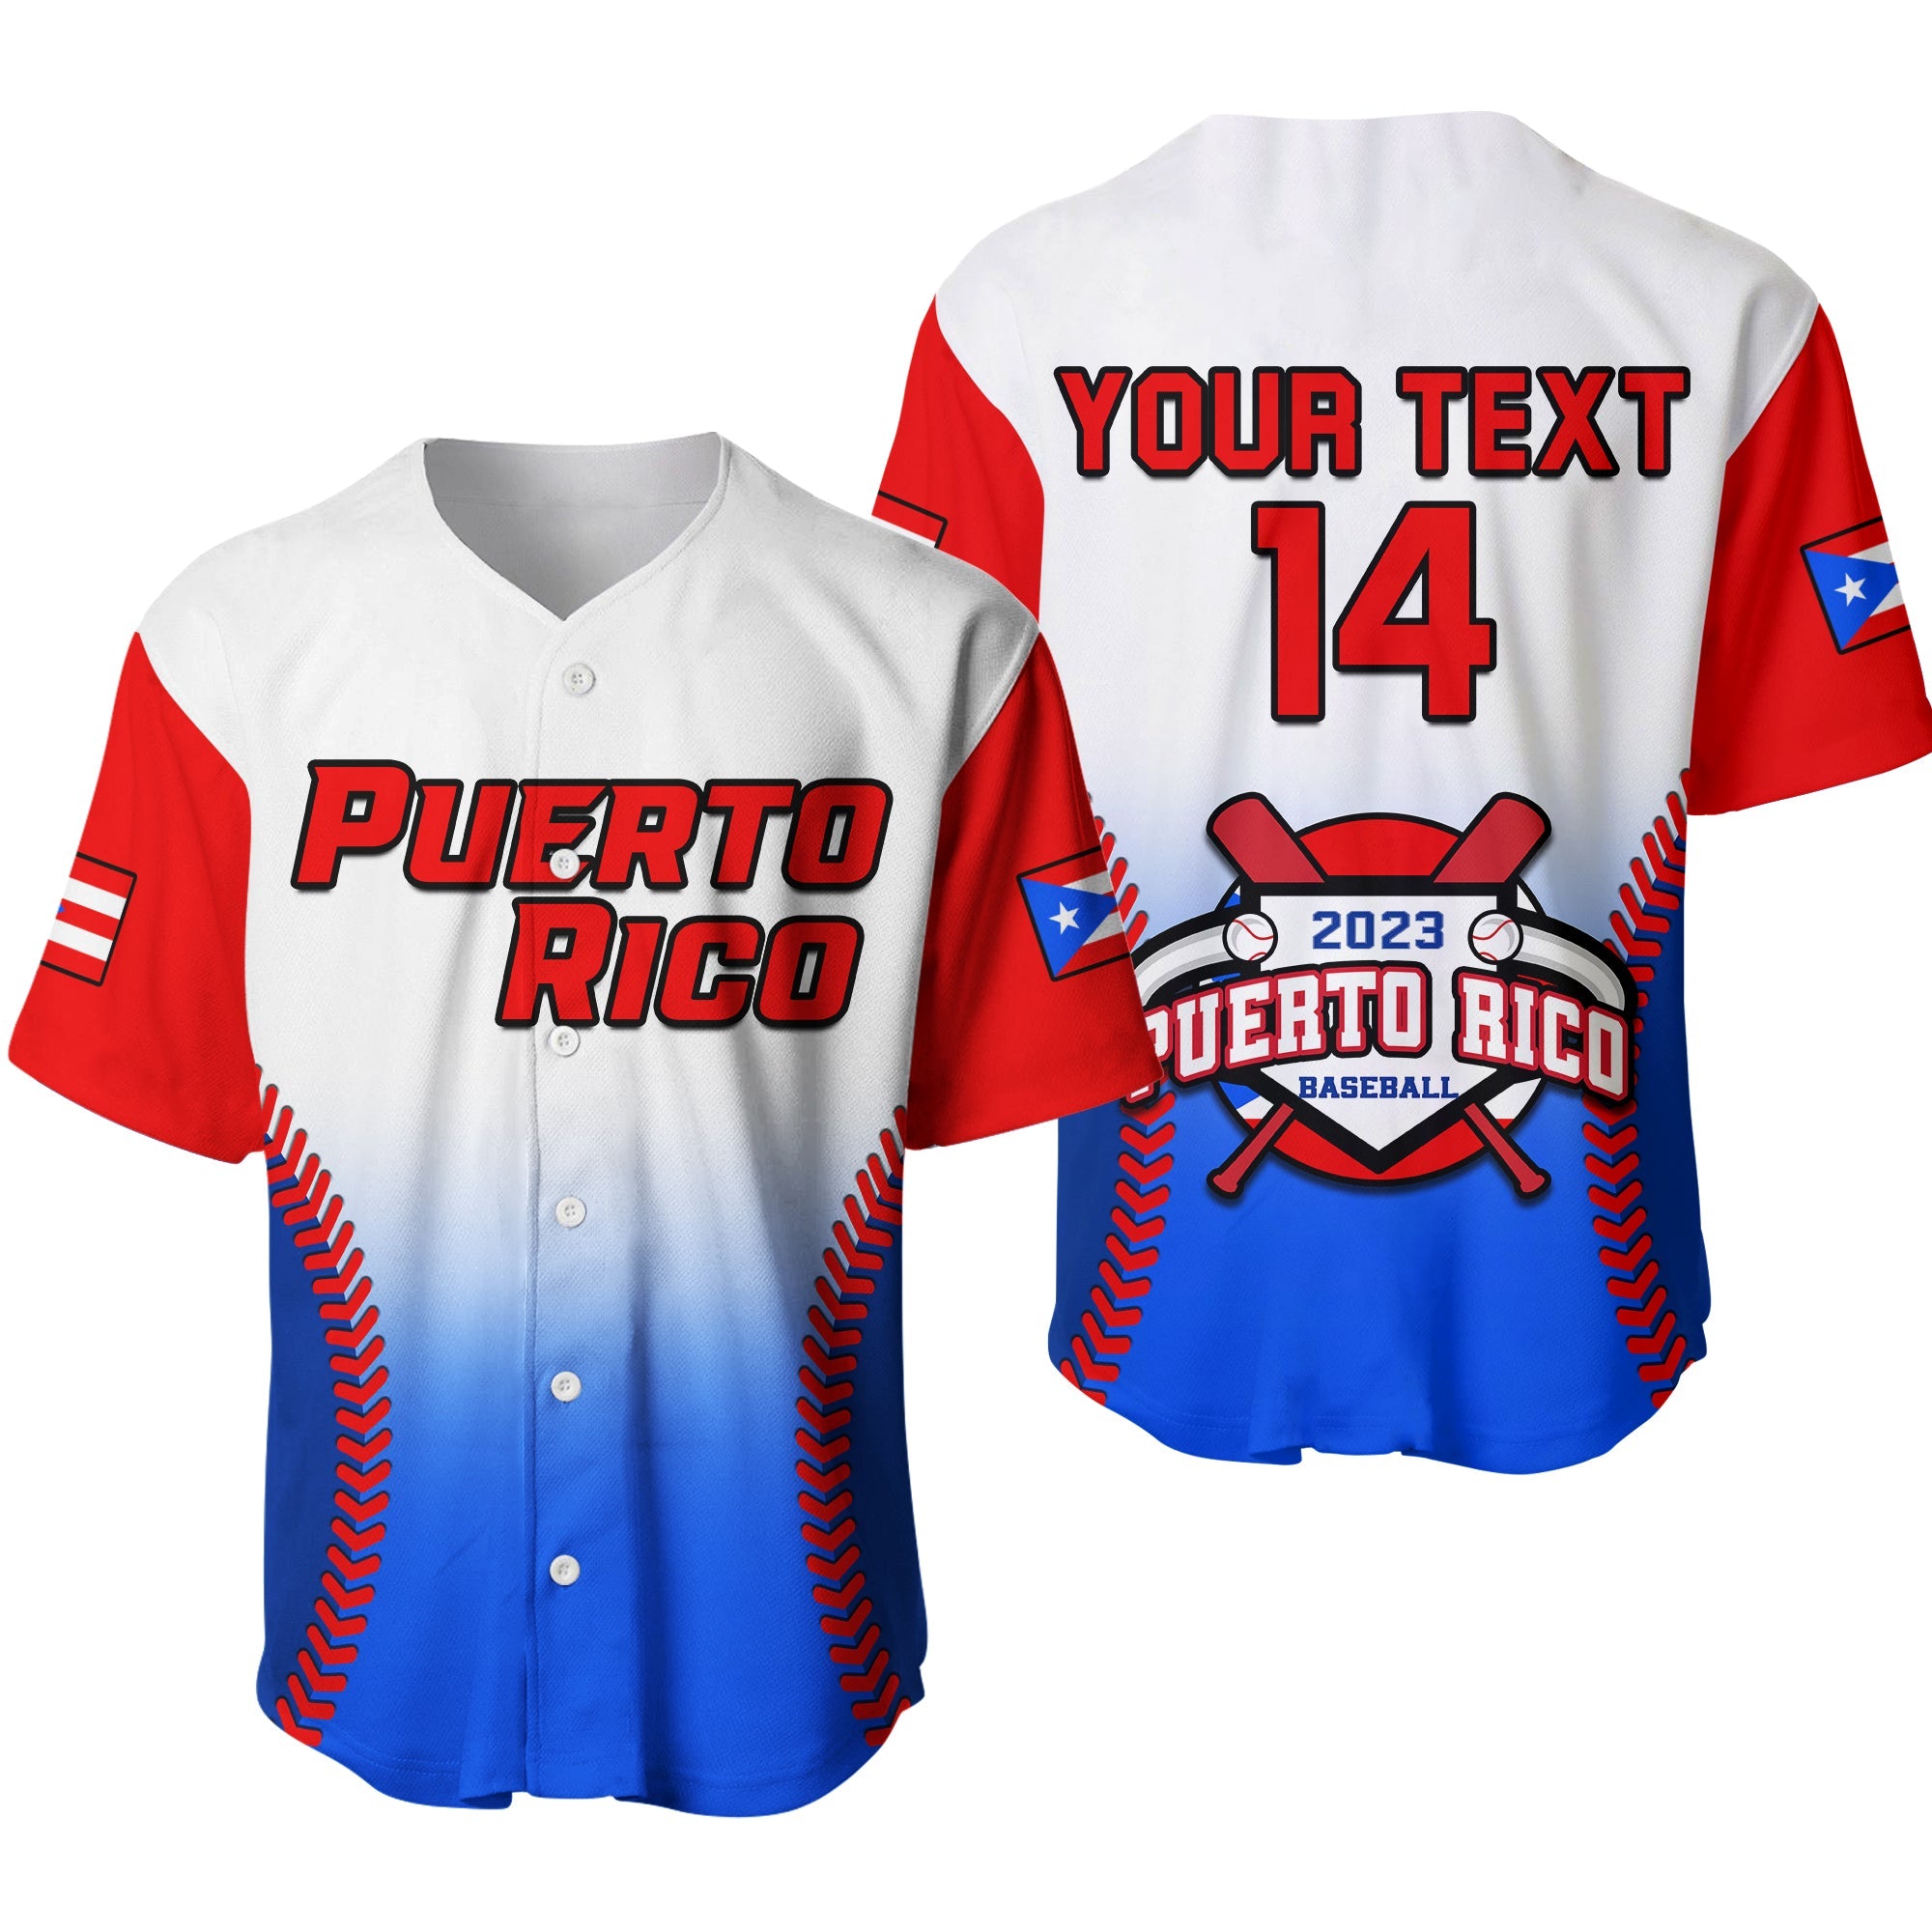 custom-text-and-number-puerto-rico-2023-baseball-jersey-baseball-classic-sporty-version-ver01